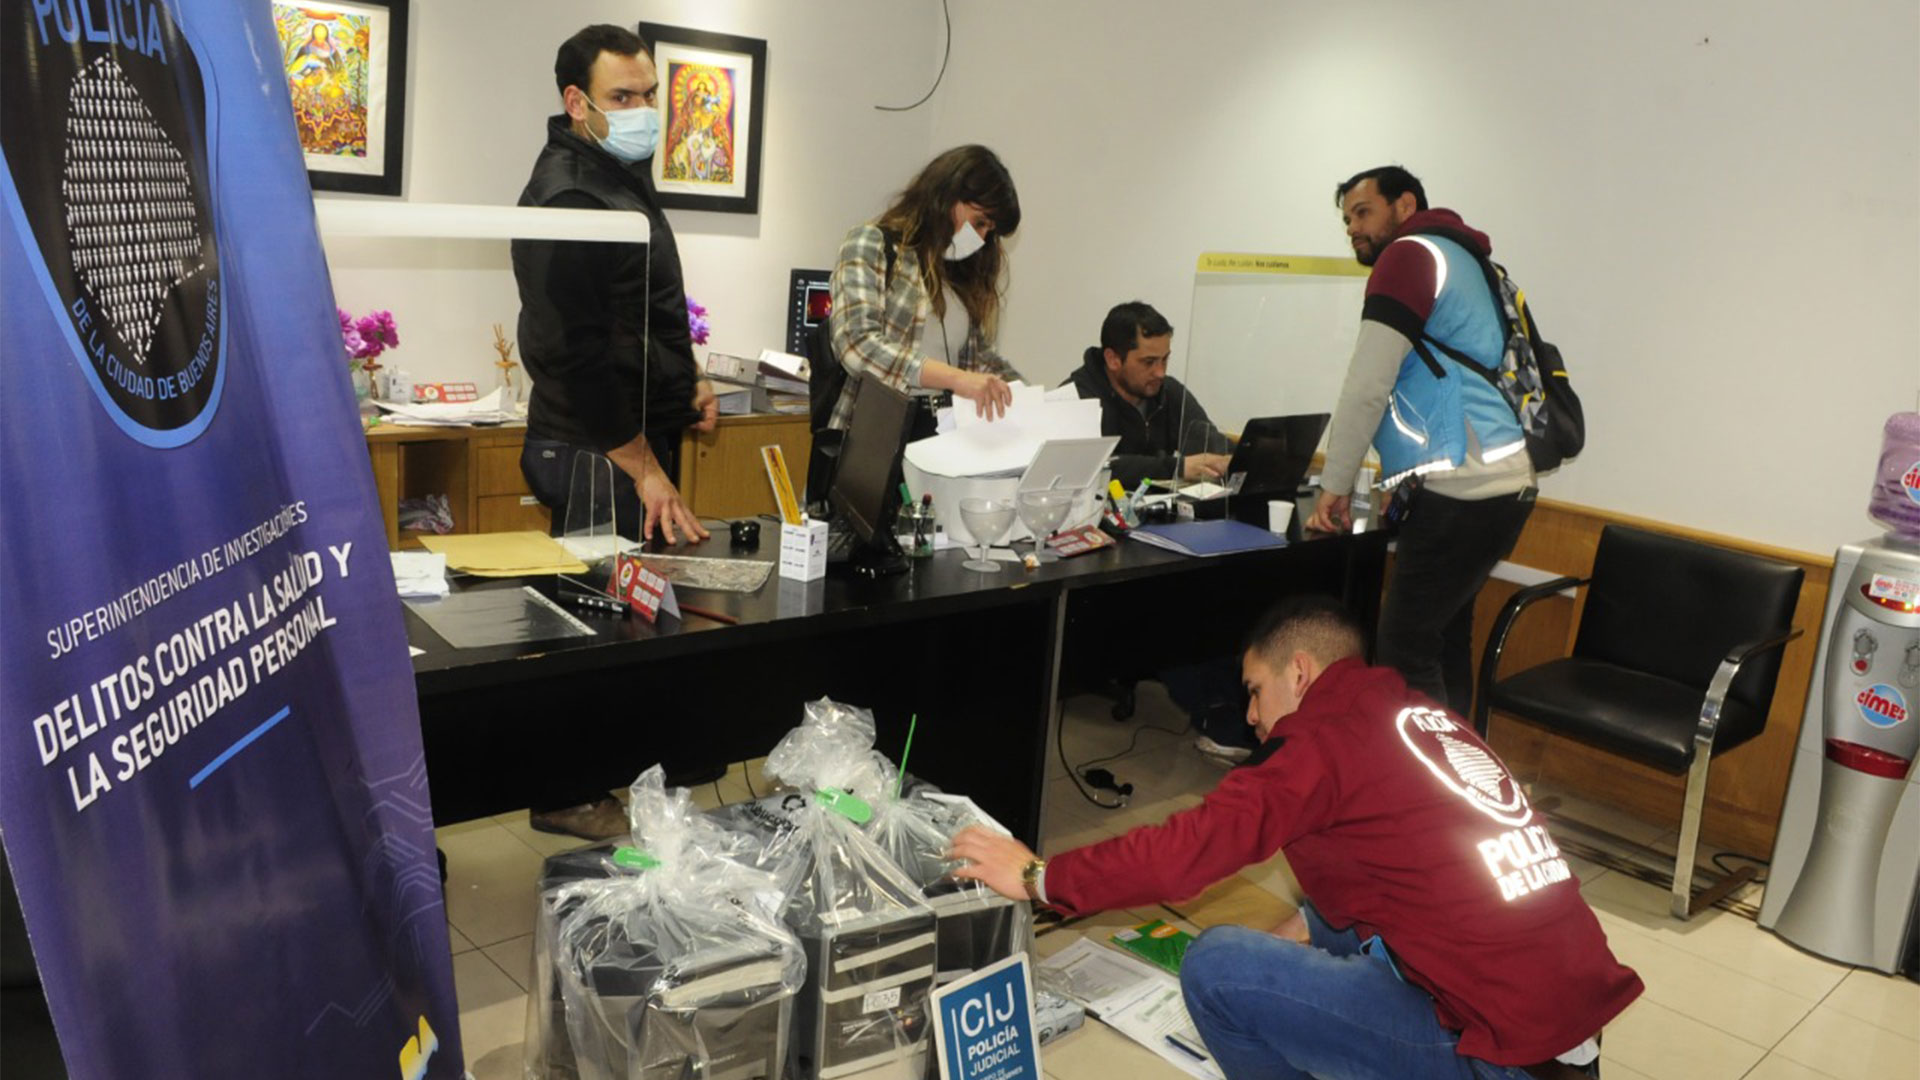 City Police personnel and other Buenos Aires and national organizations seize documentation from the medical center "The Bolivian Health". 